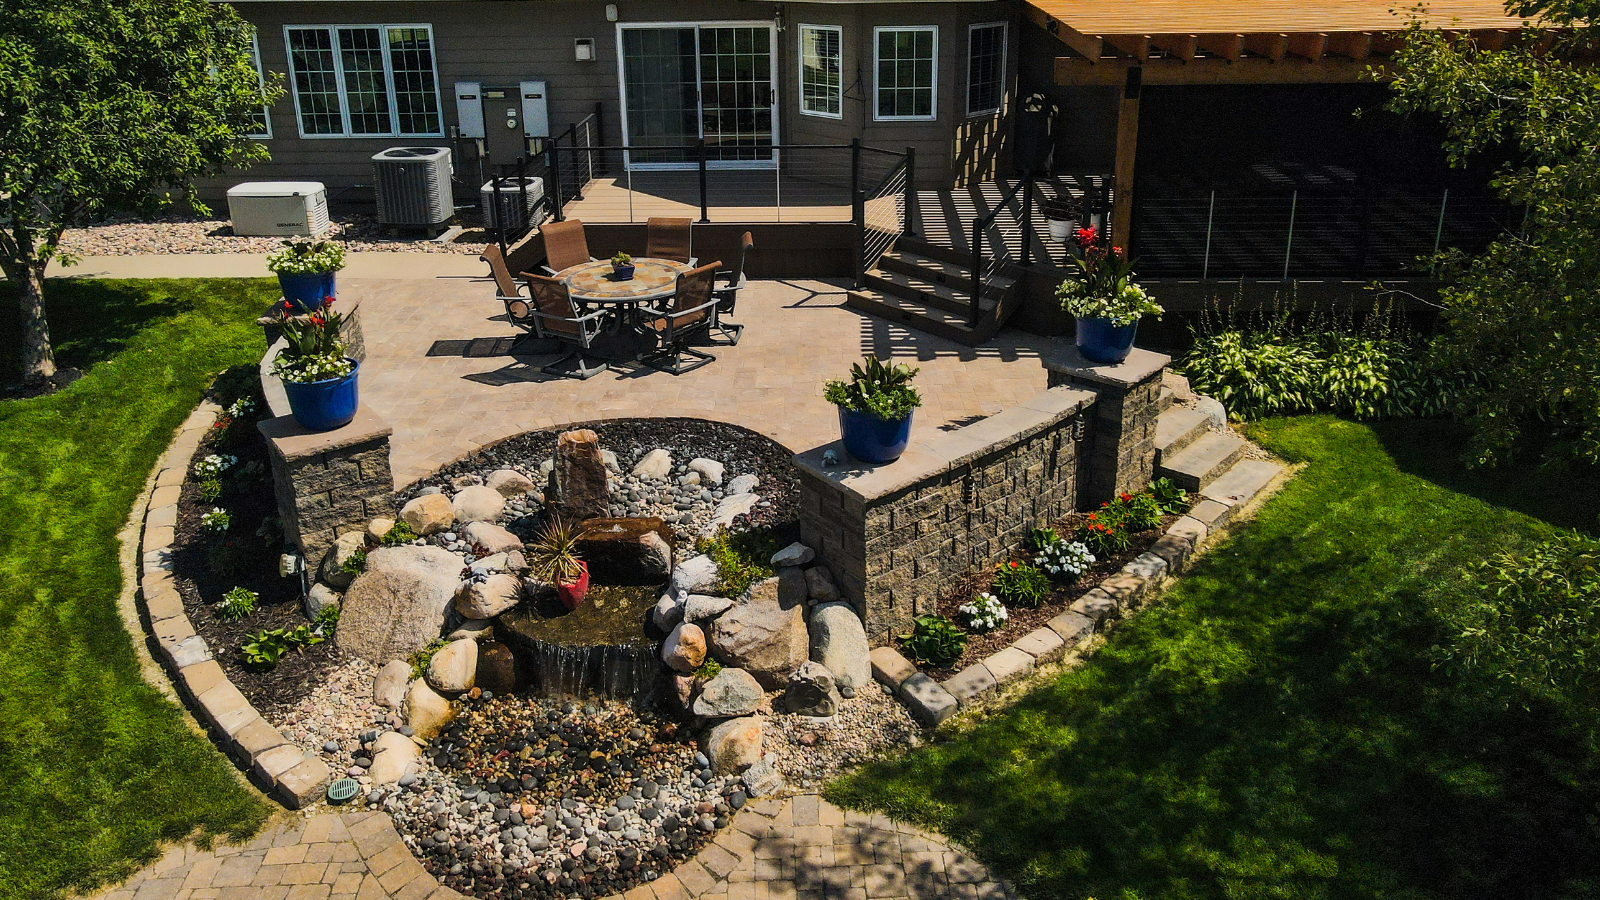 What Can I Do to Make My Landscaping More Colorful and Interesting?